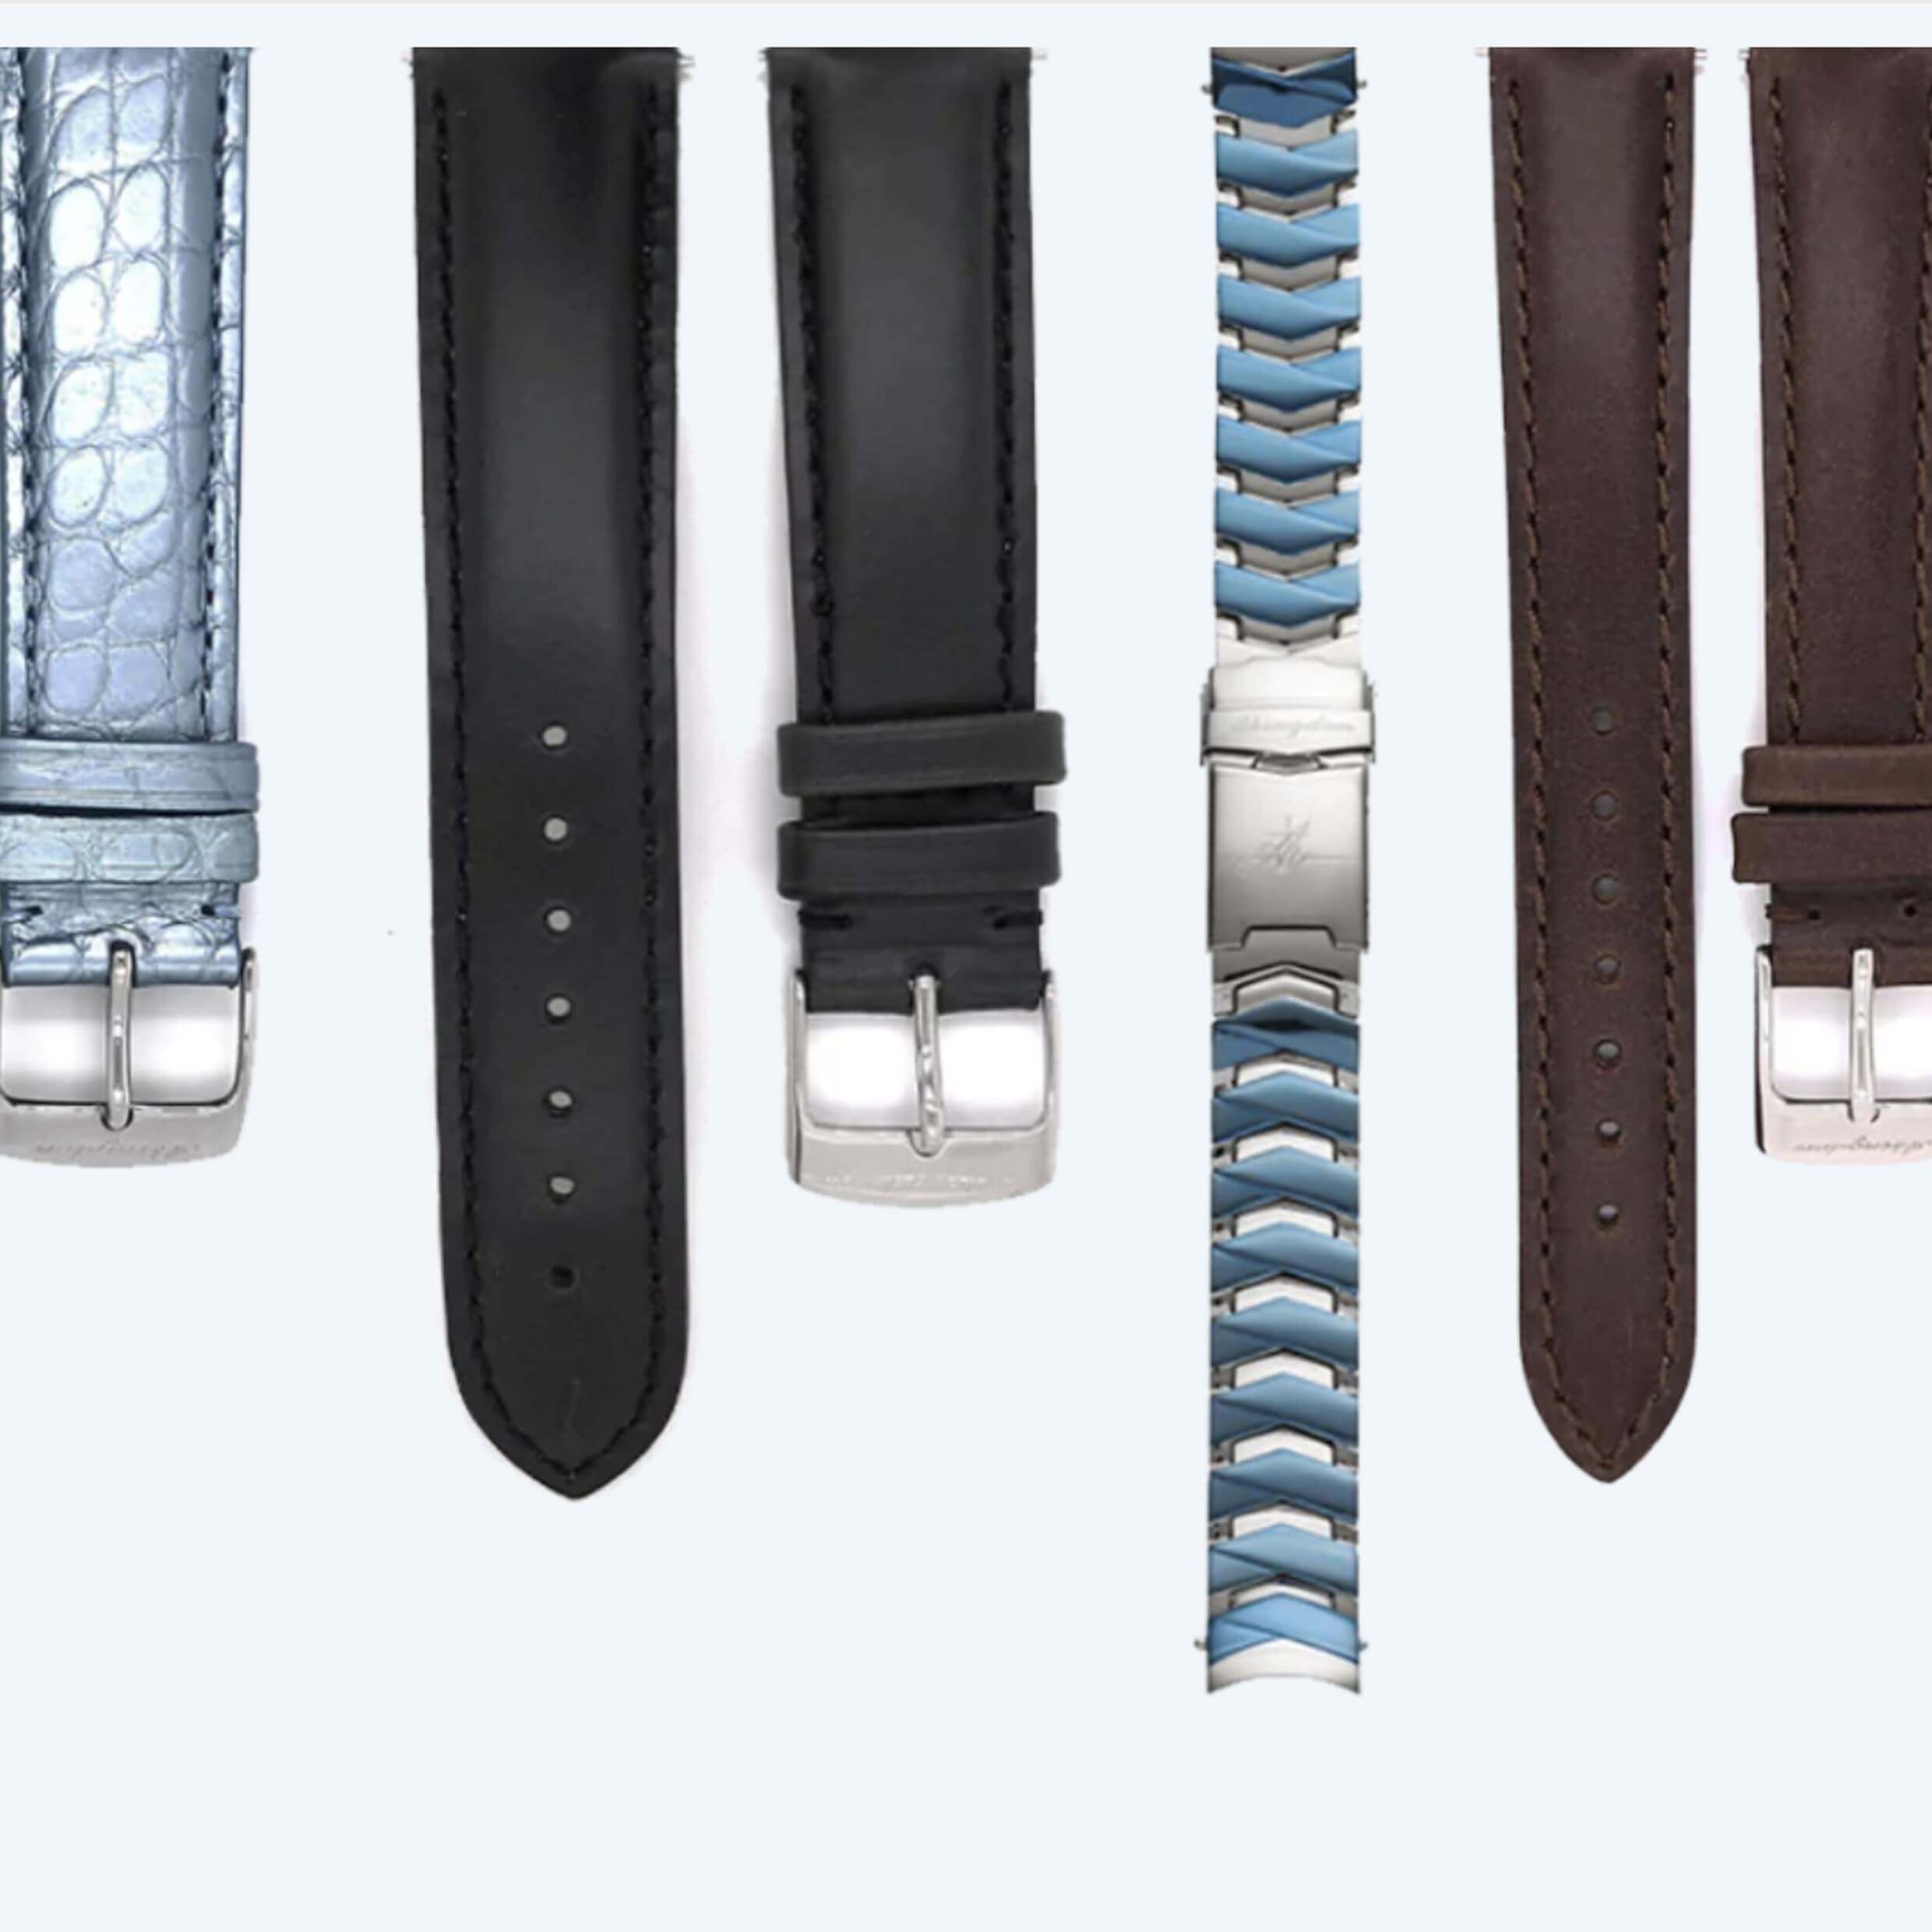 Abingdon Co. Image displays Variety of leather, silicone, metal, and alligator watch straps that can all be changed out easily with quick change release spring bars.